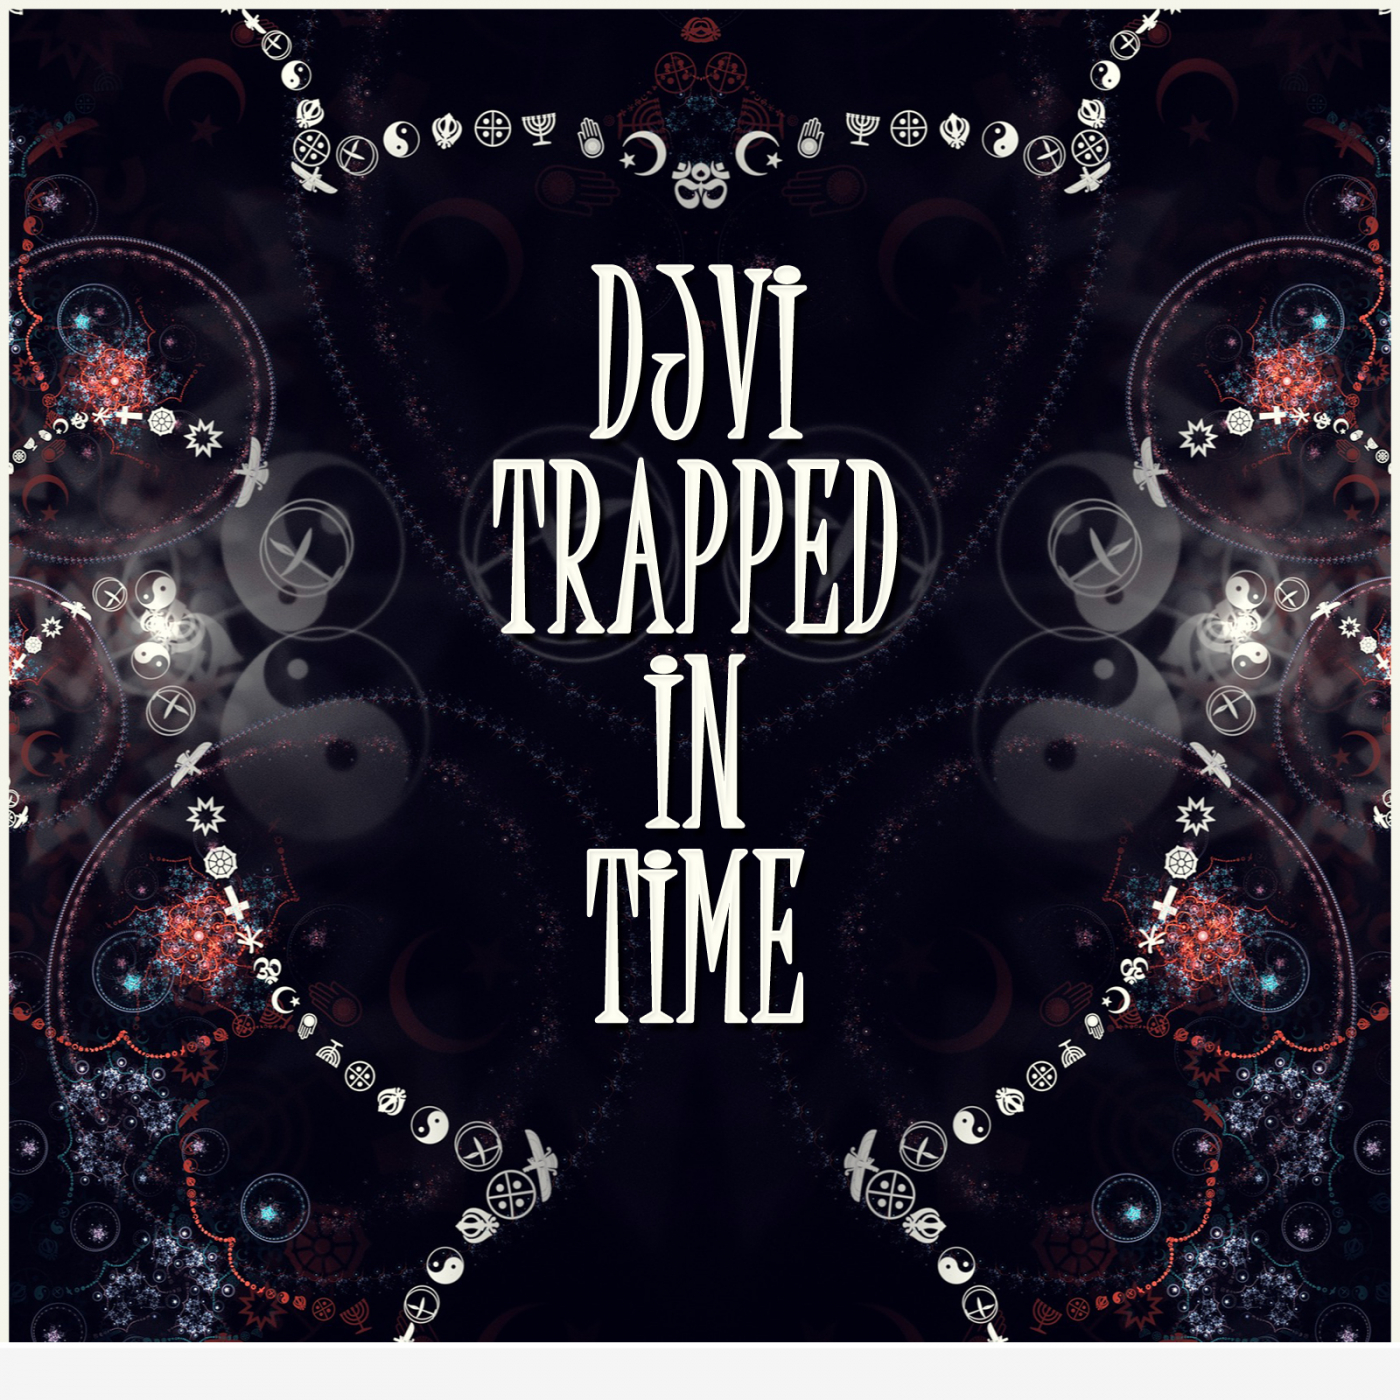 Trapped in Time (Original Mix)